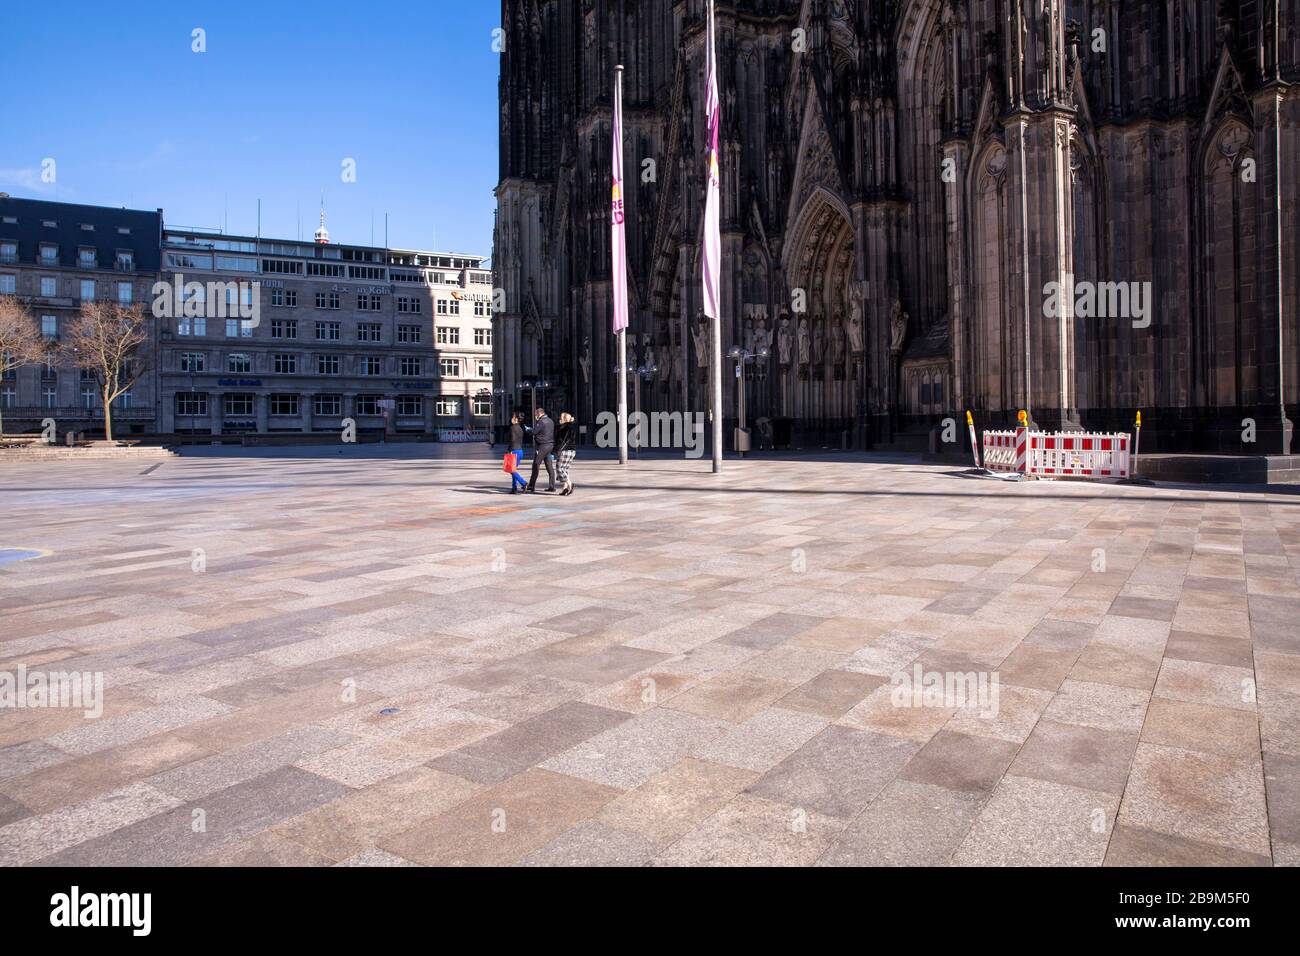 Coronavirus / Covid 19 outbreak, March 24th. 2020. The almost deserted square around Cologne Cathedral, usually visited by thousands of people, Cologn Stock Photo